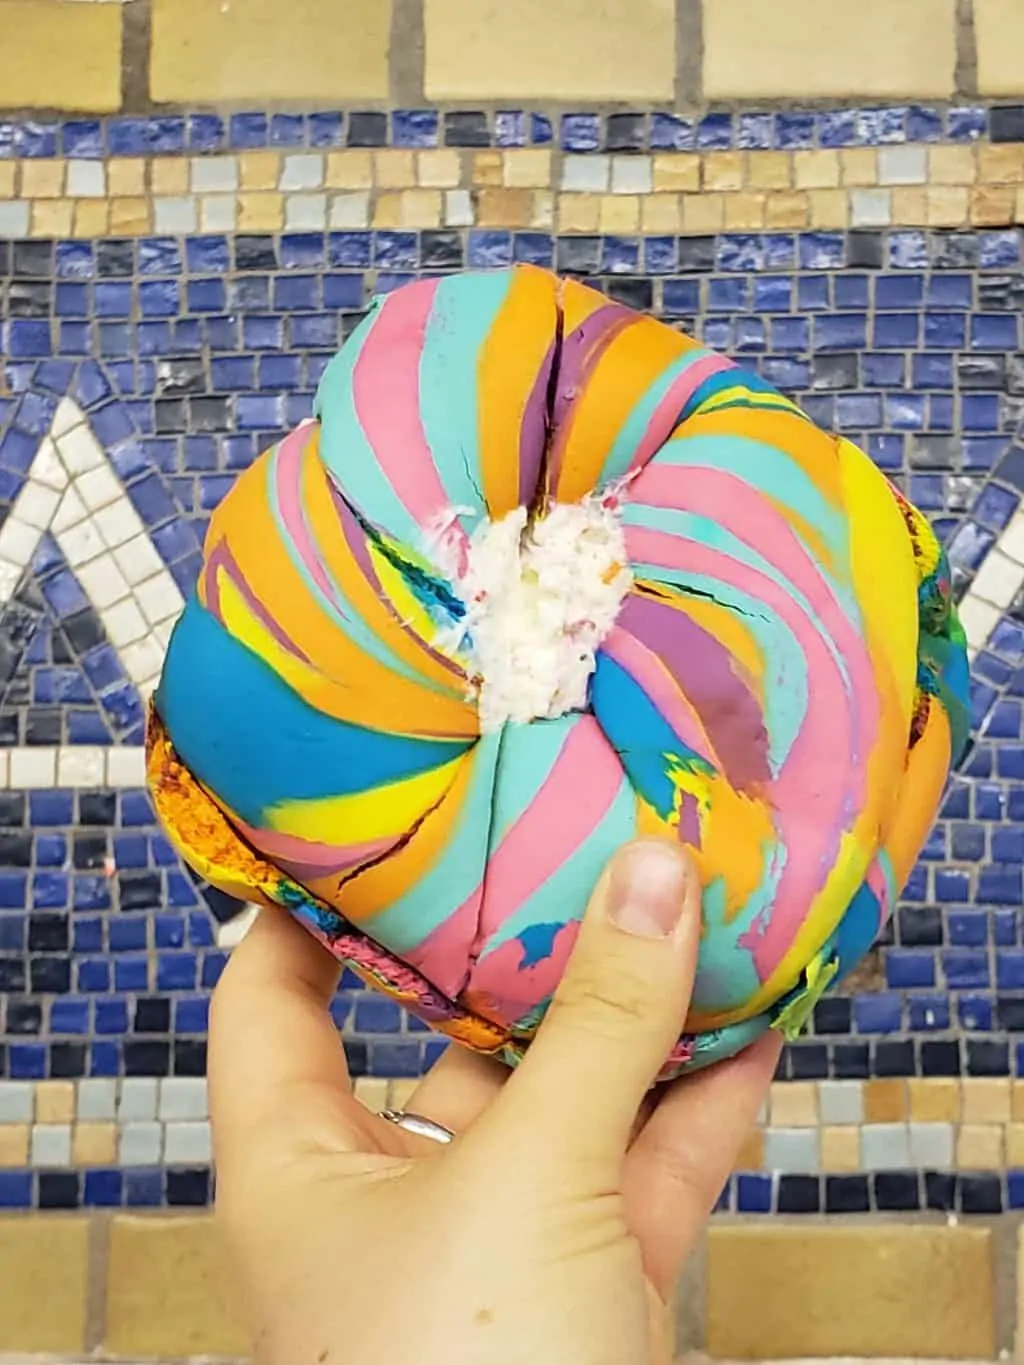 Rainbow bagel from the bagel store in Brooklyn. 